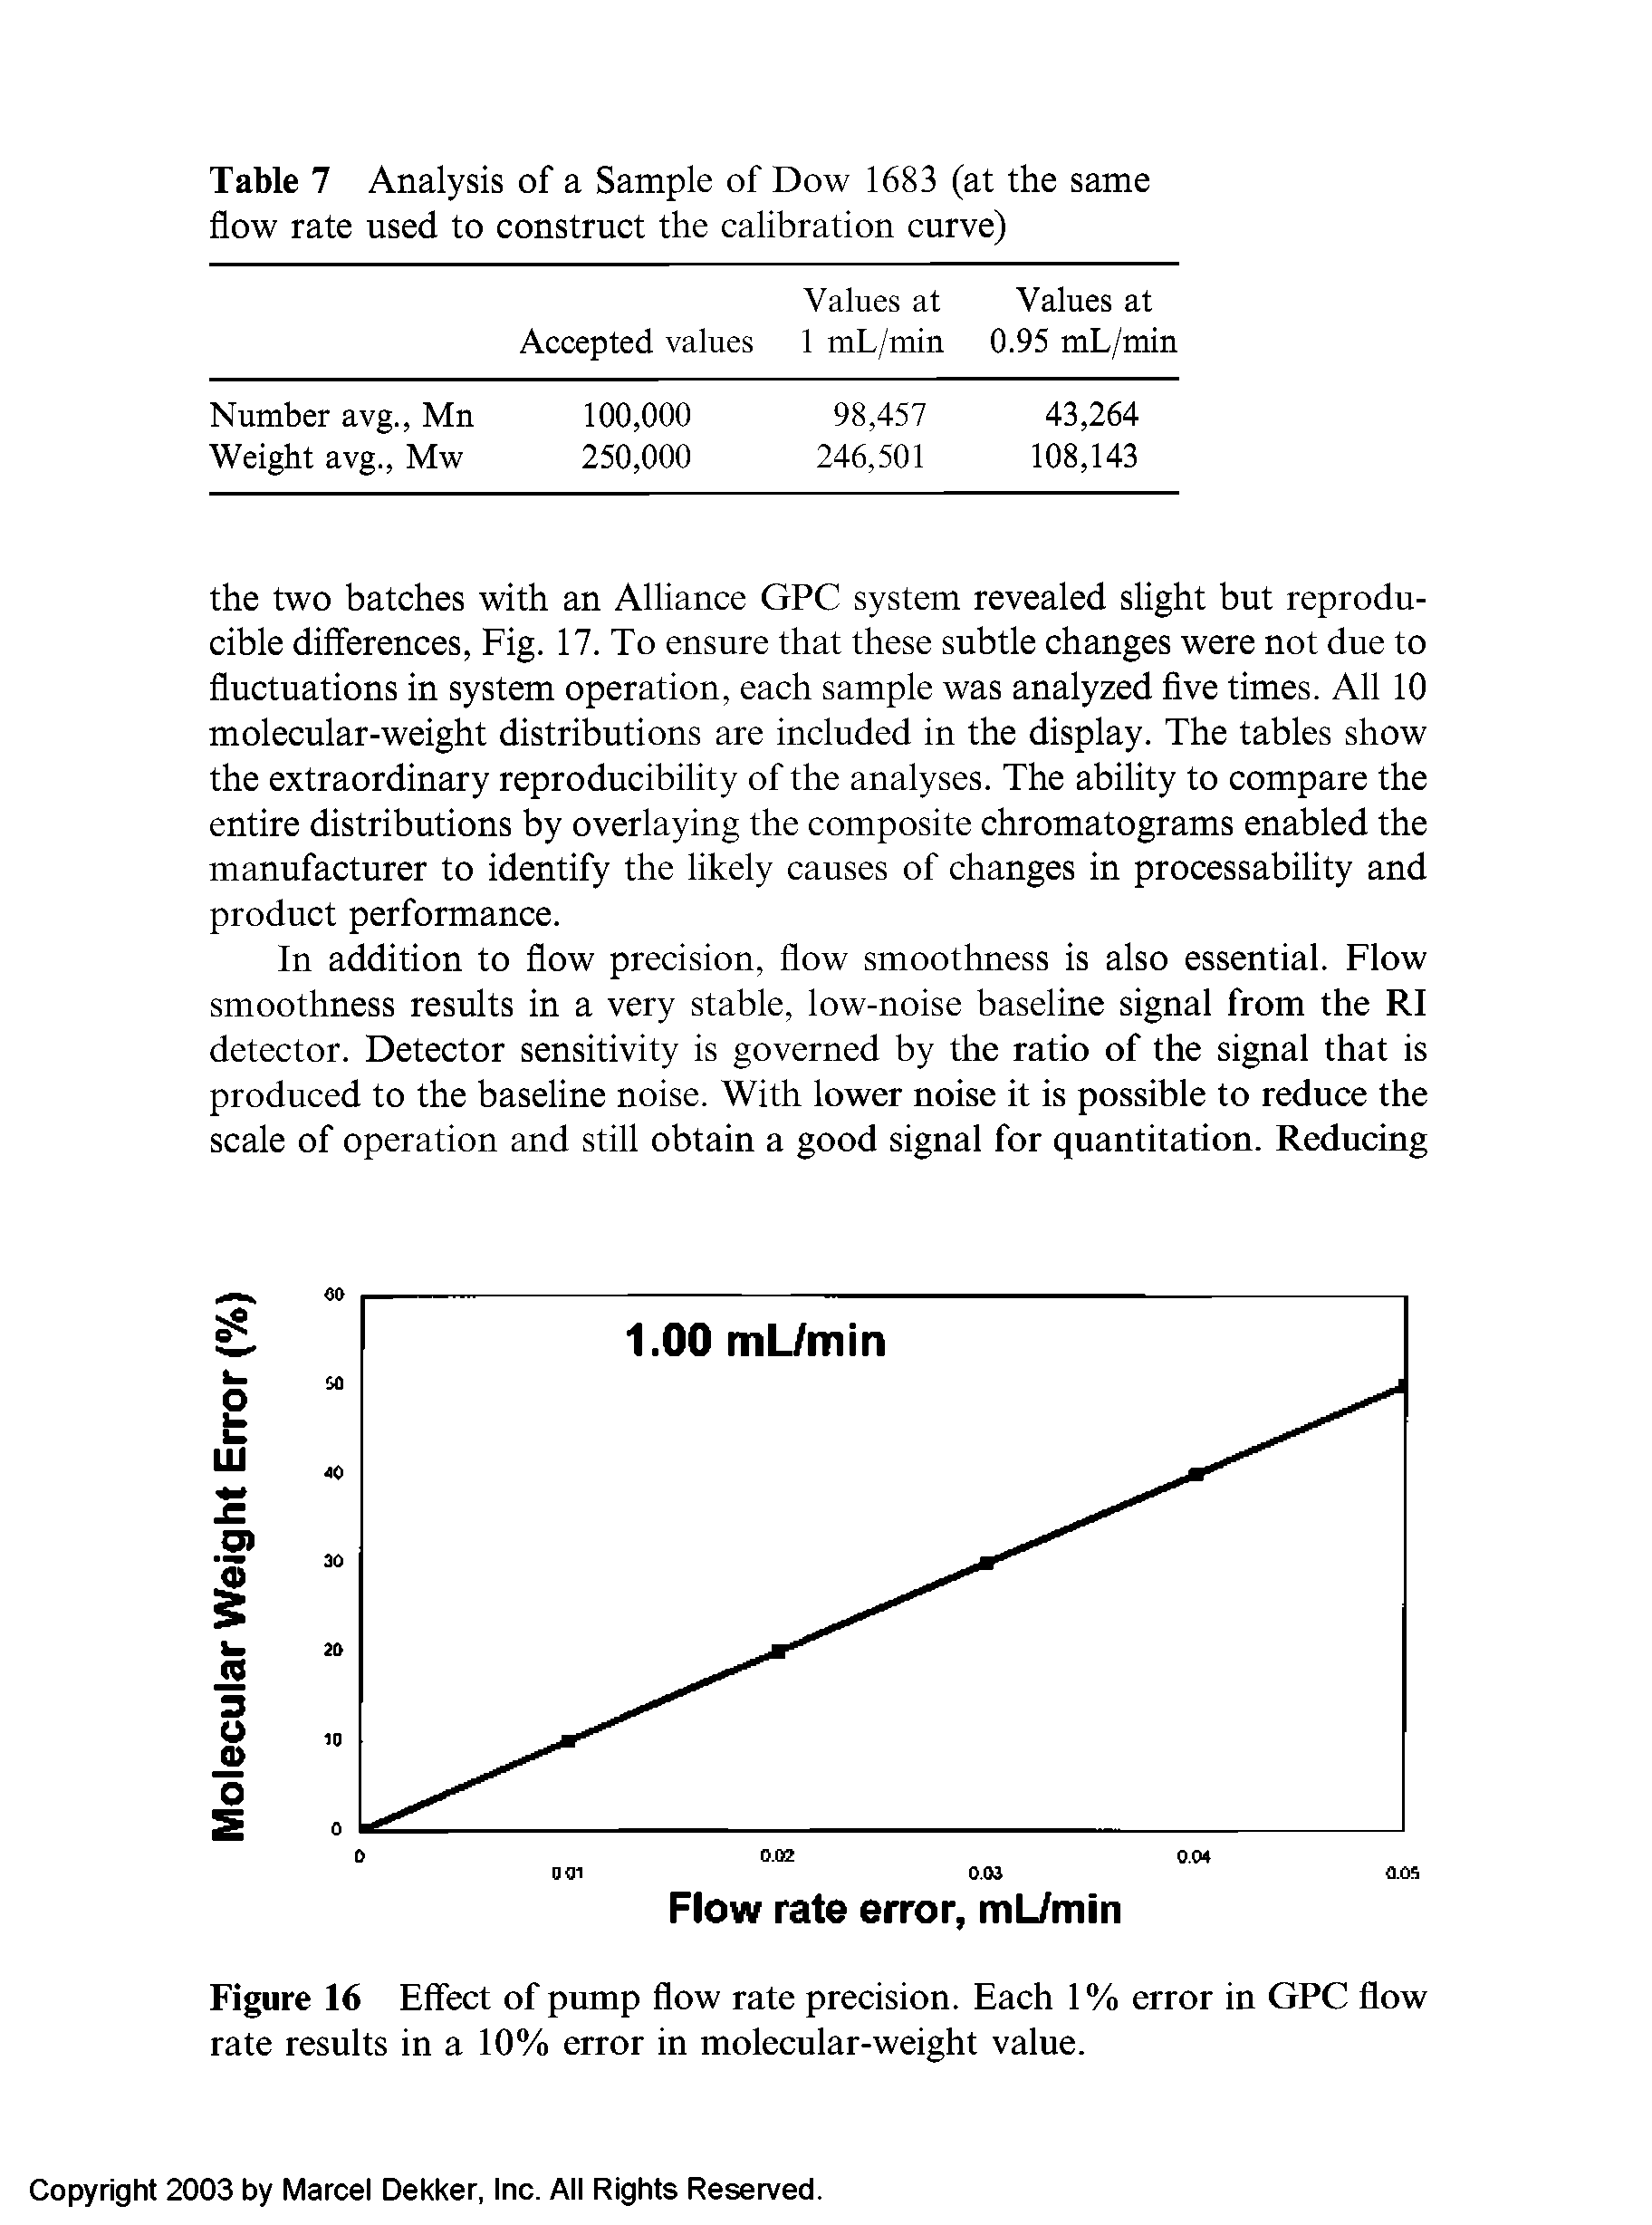 Figure 16 Effect of pump flow rate precision. Each 1 % error in GPC ffow rate results in a 10% error in molecular-weight value.